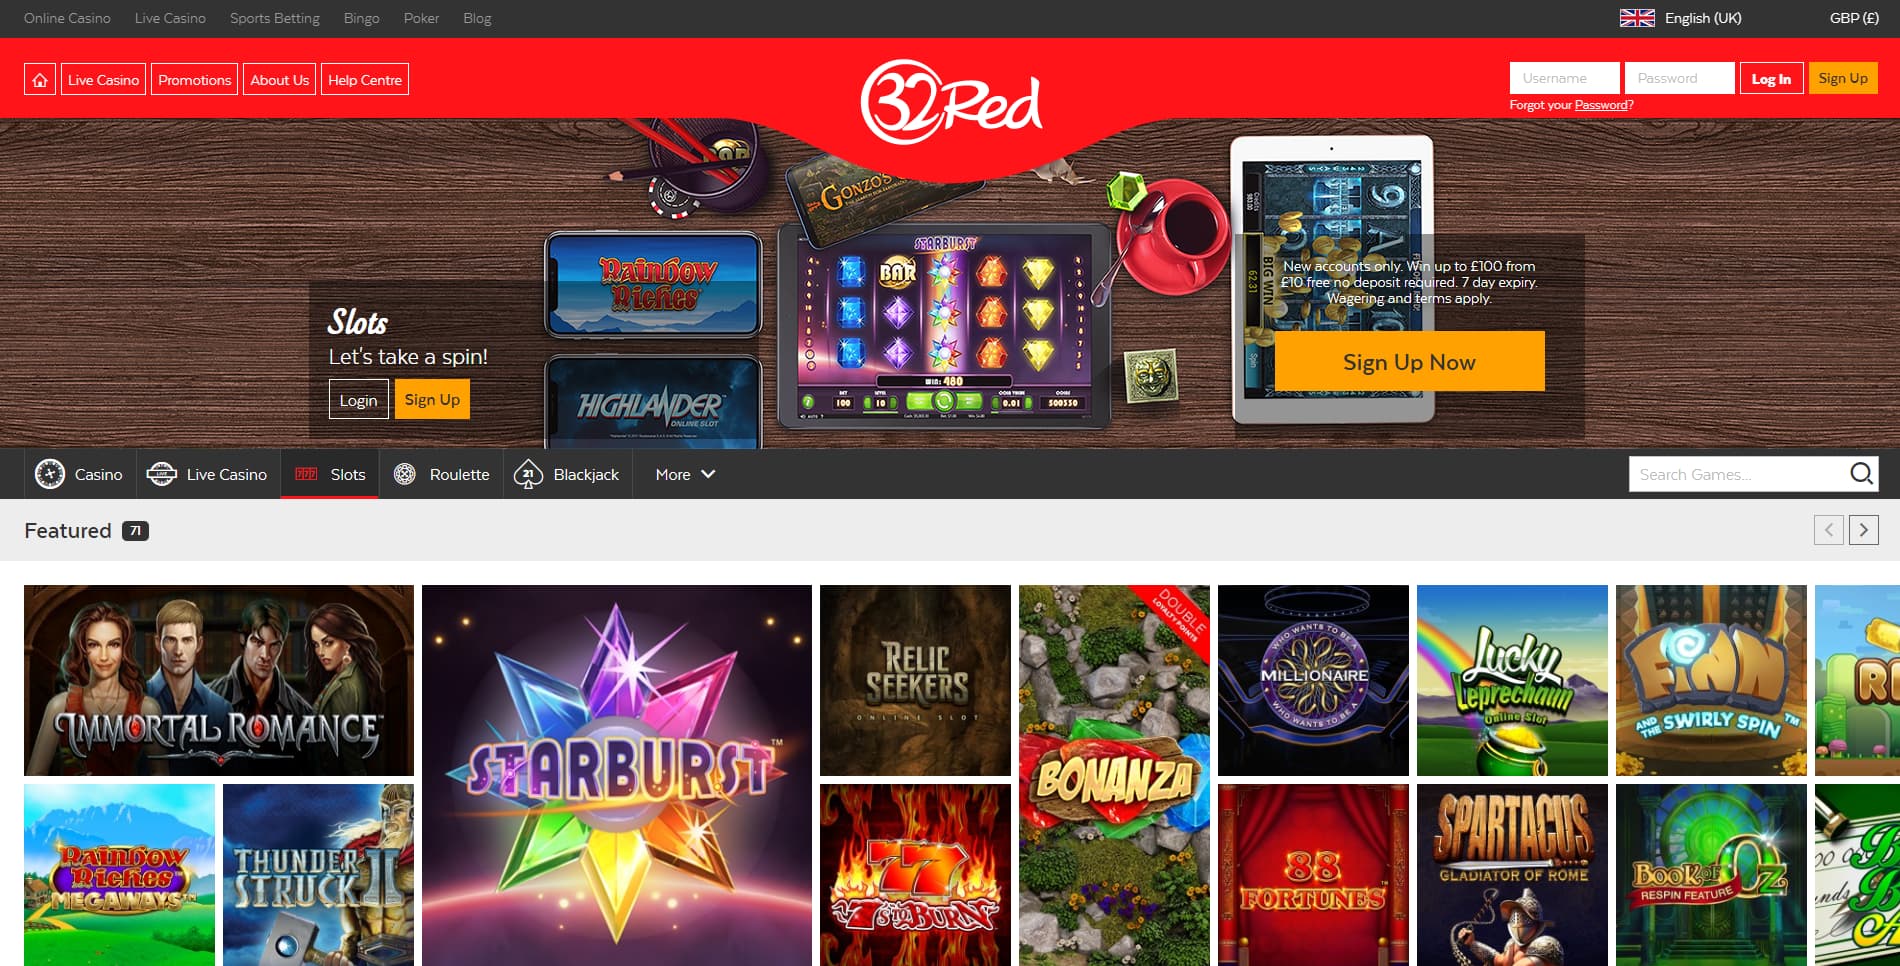 32red – Get 10 Free Spins and £50 welcome bonus with your first ...